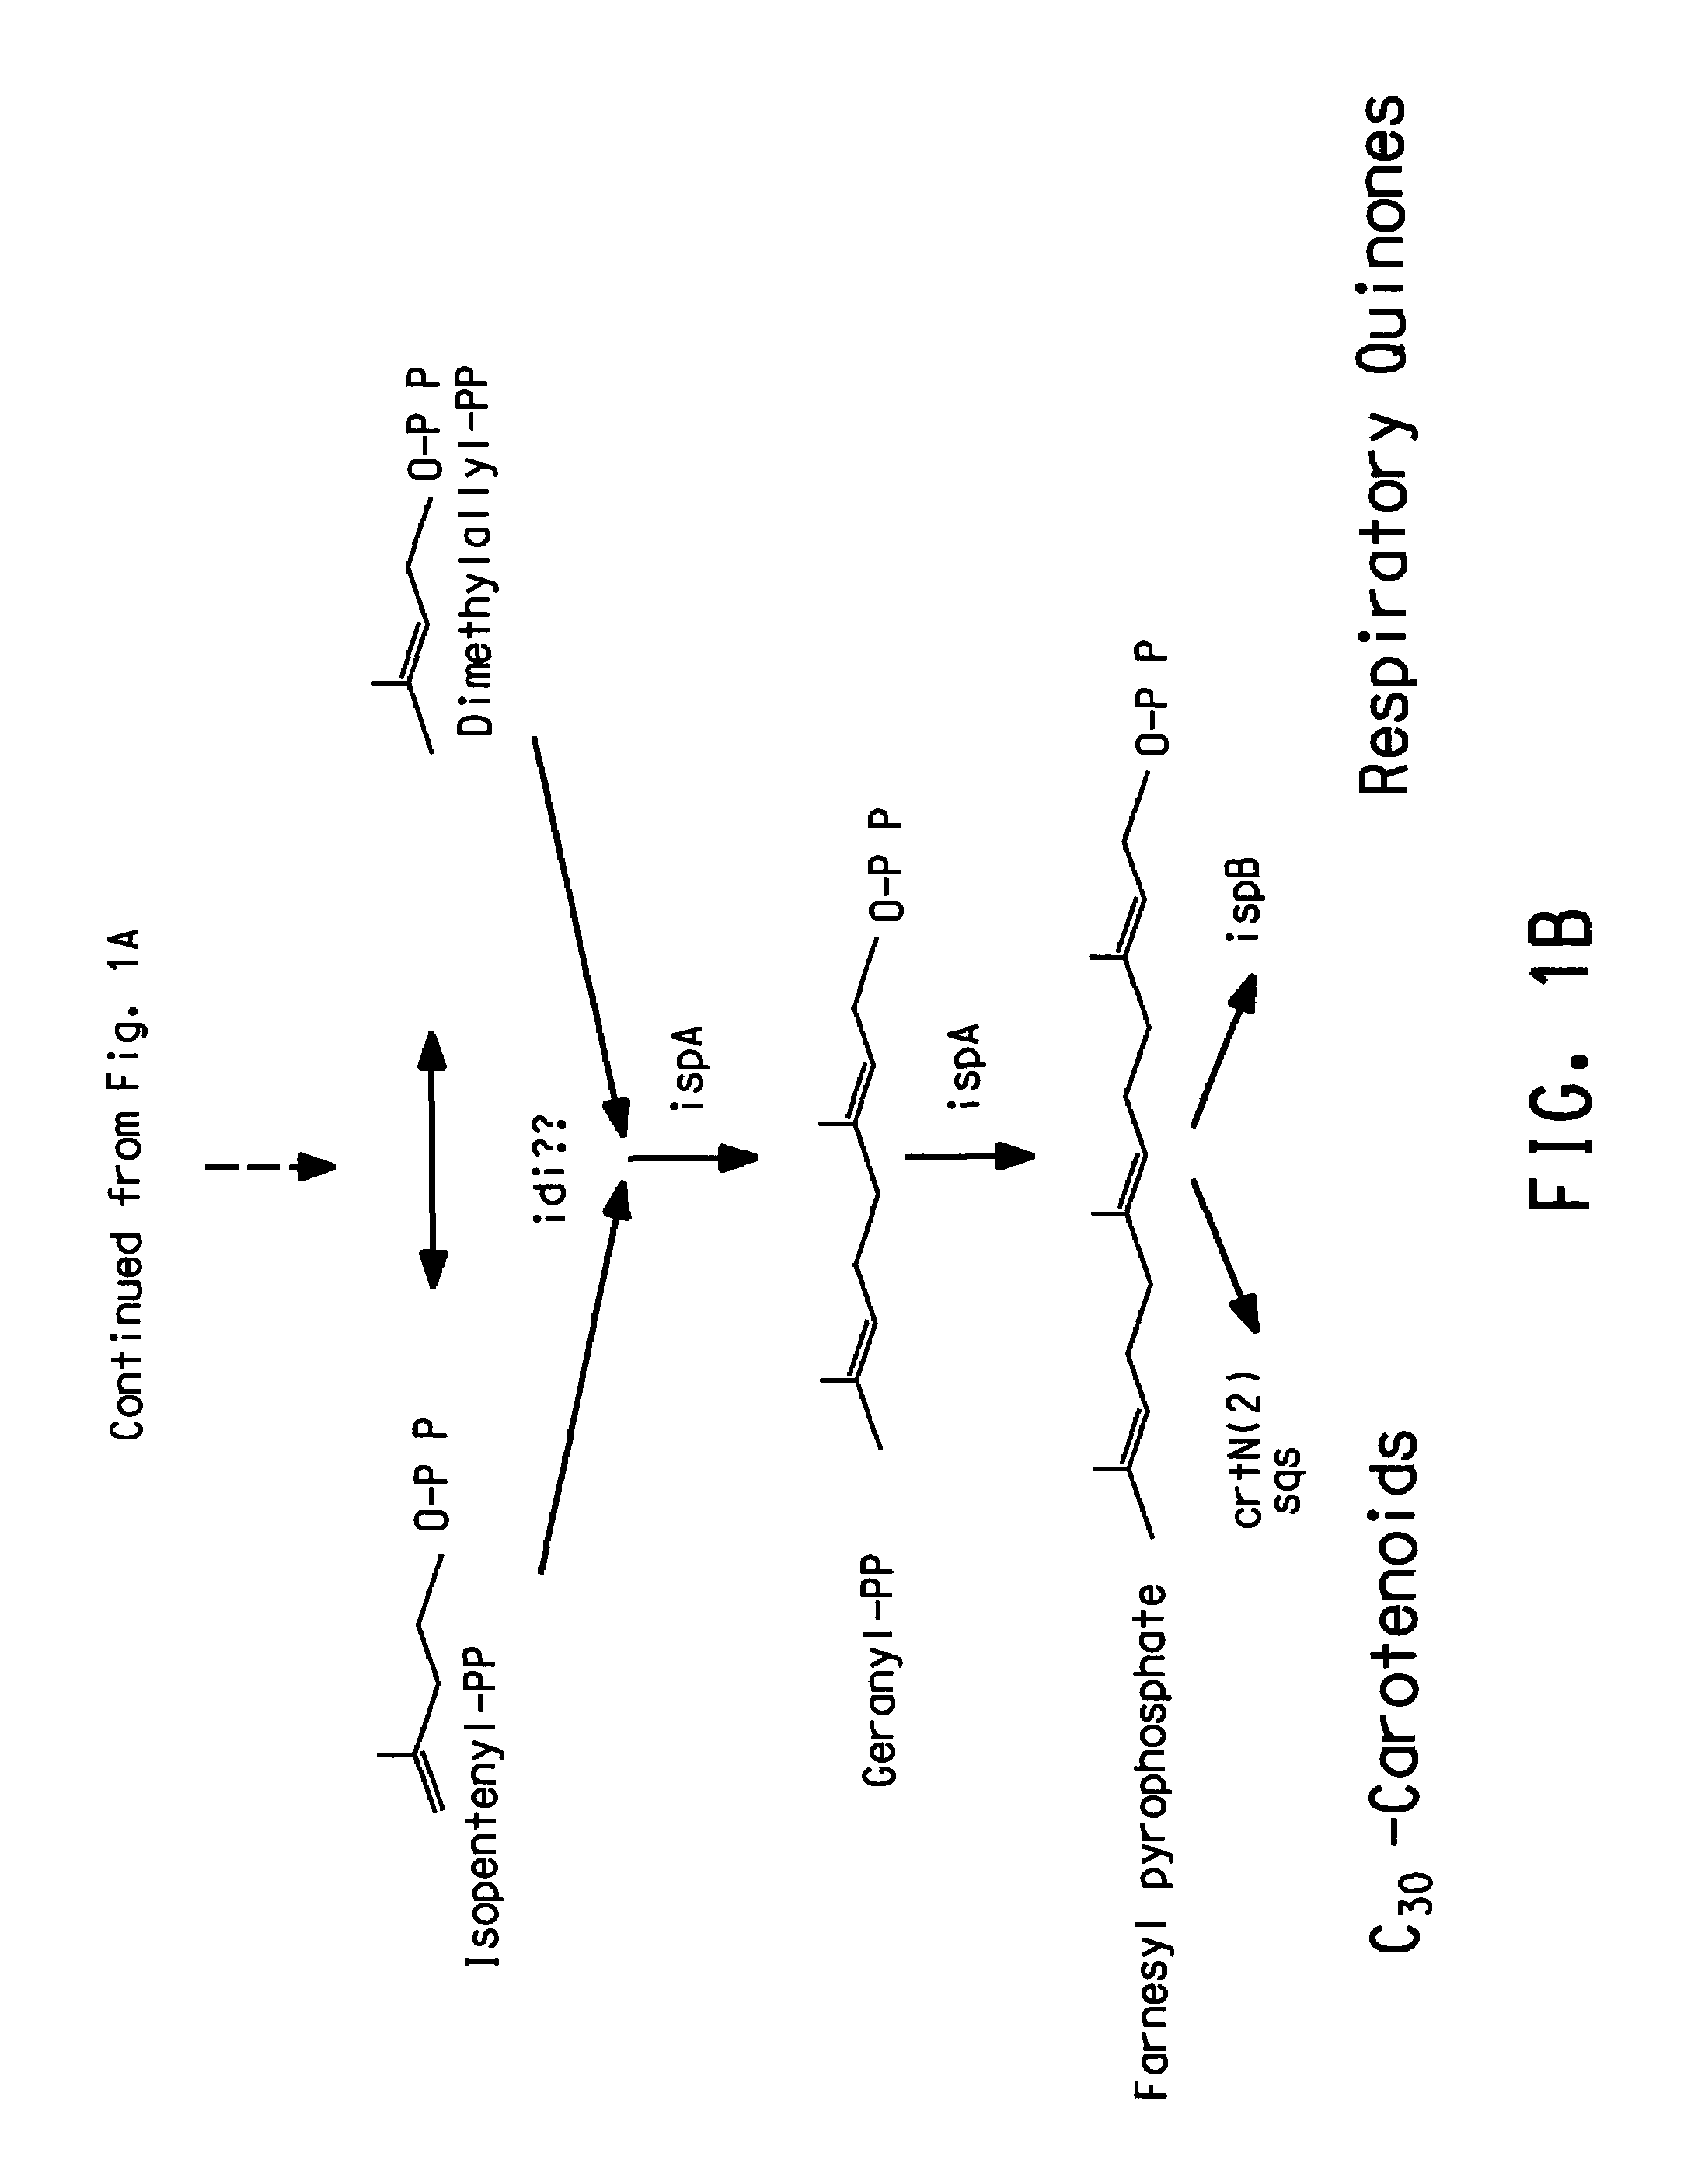 Genes involved in isoprenoid compound production